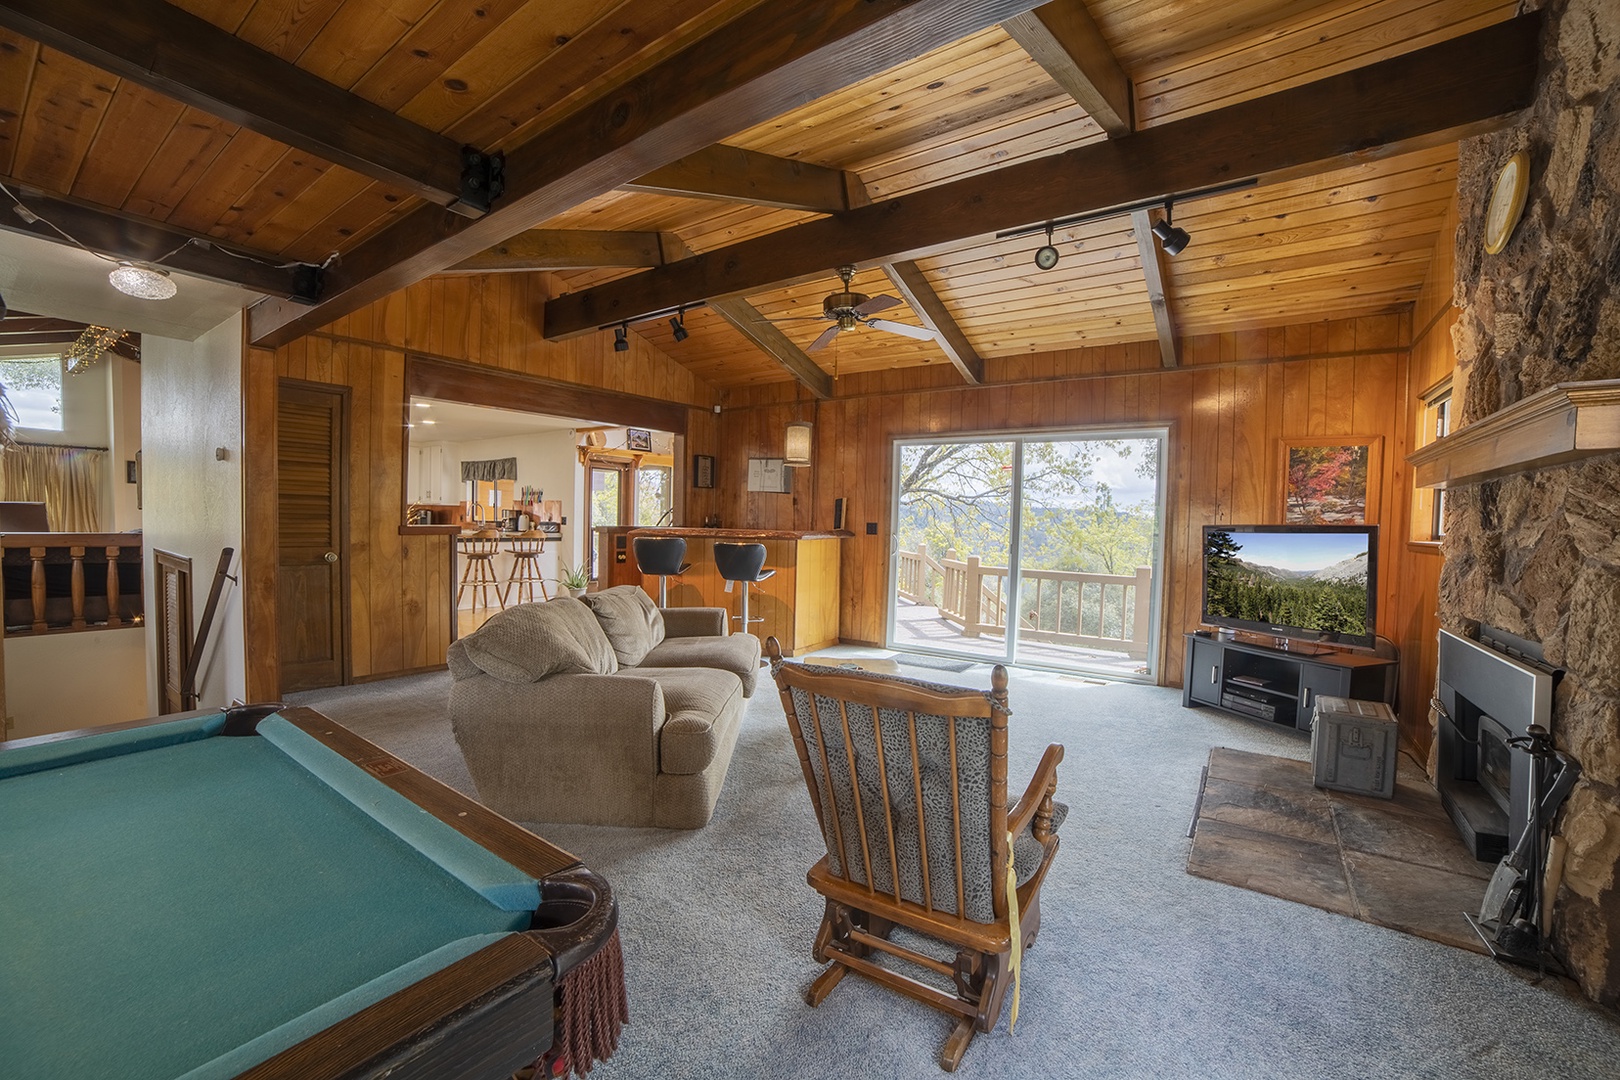 Game room with pool table, bar, seating area, and Smart TV